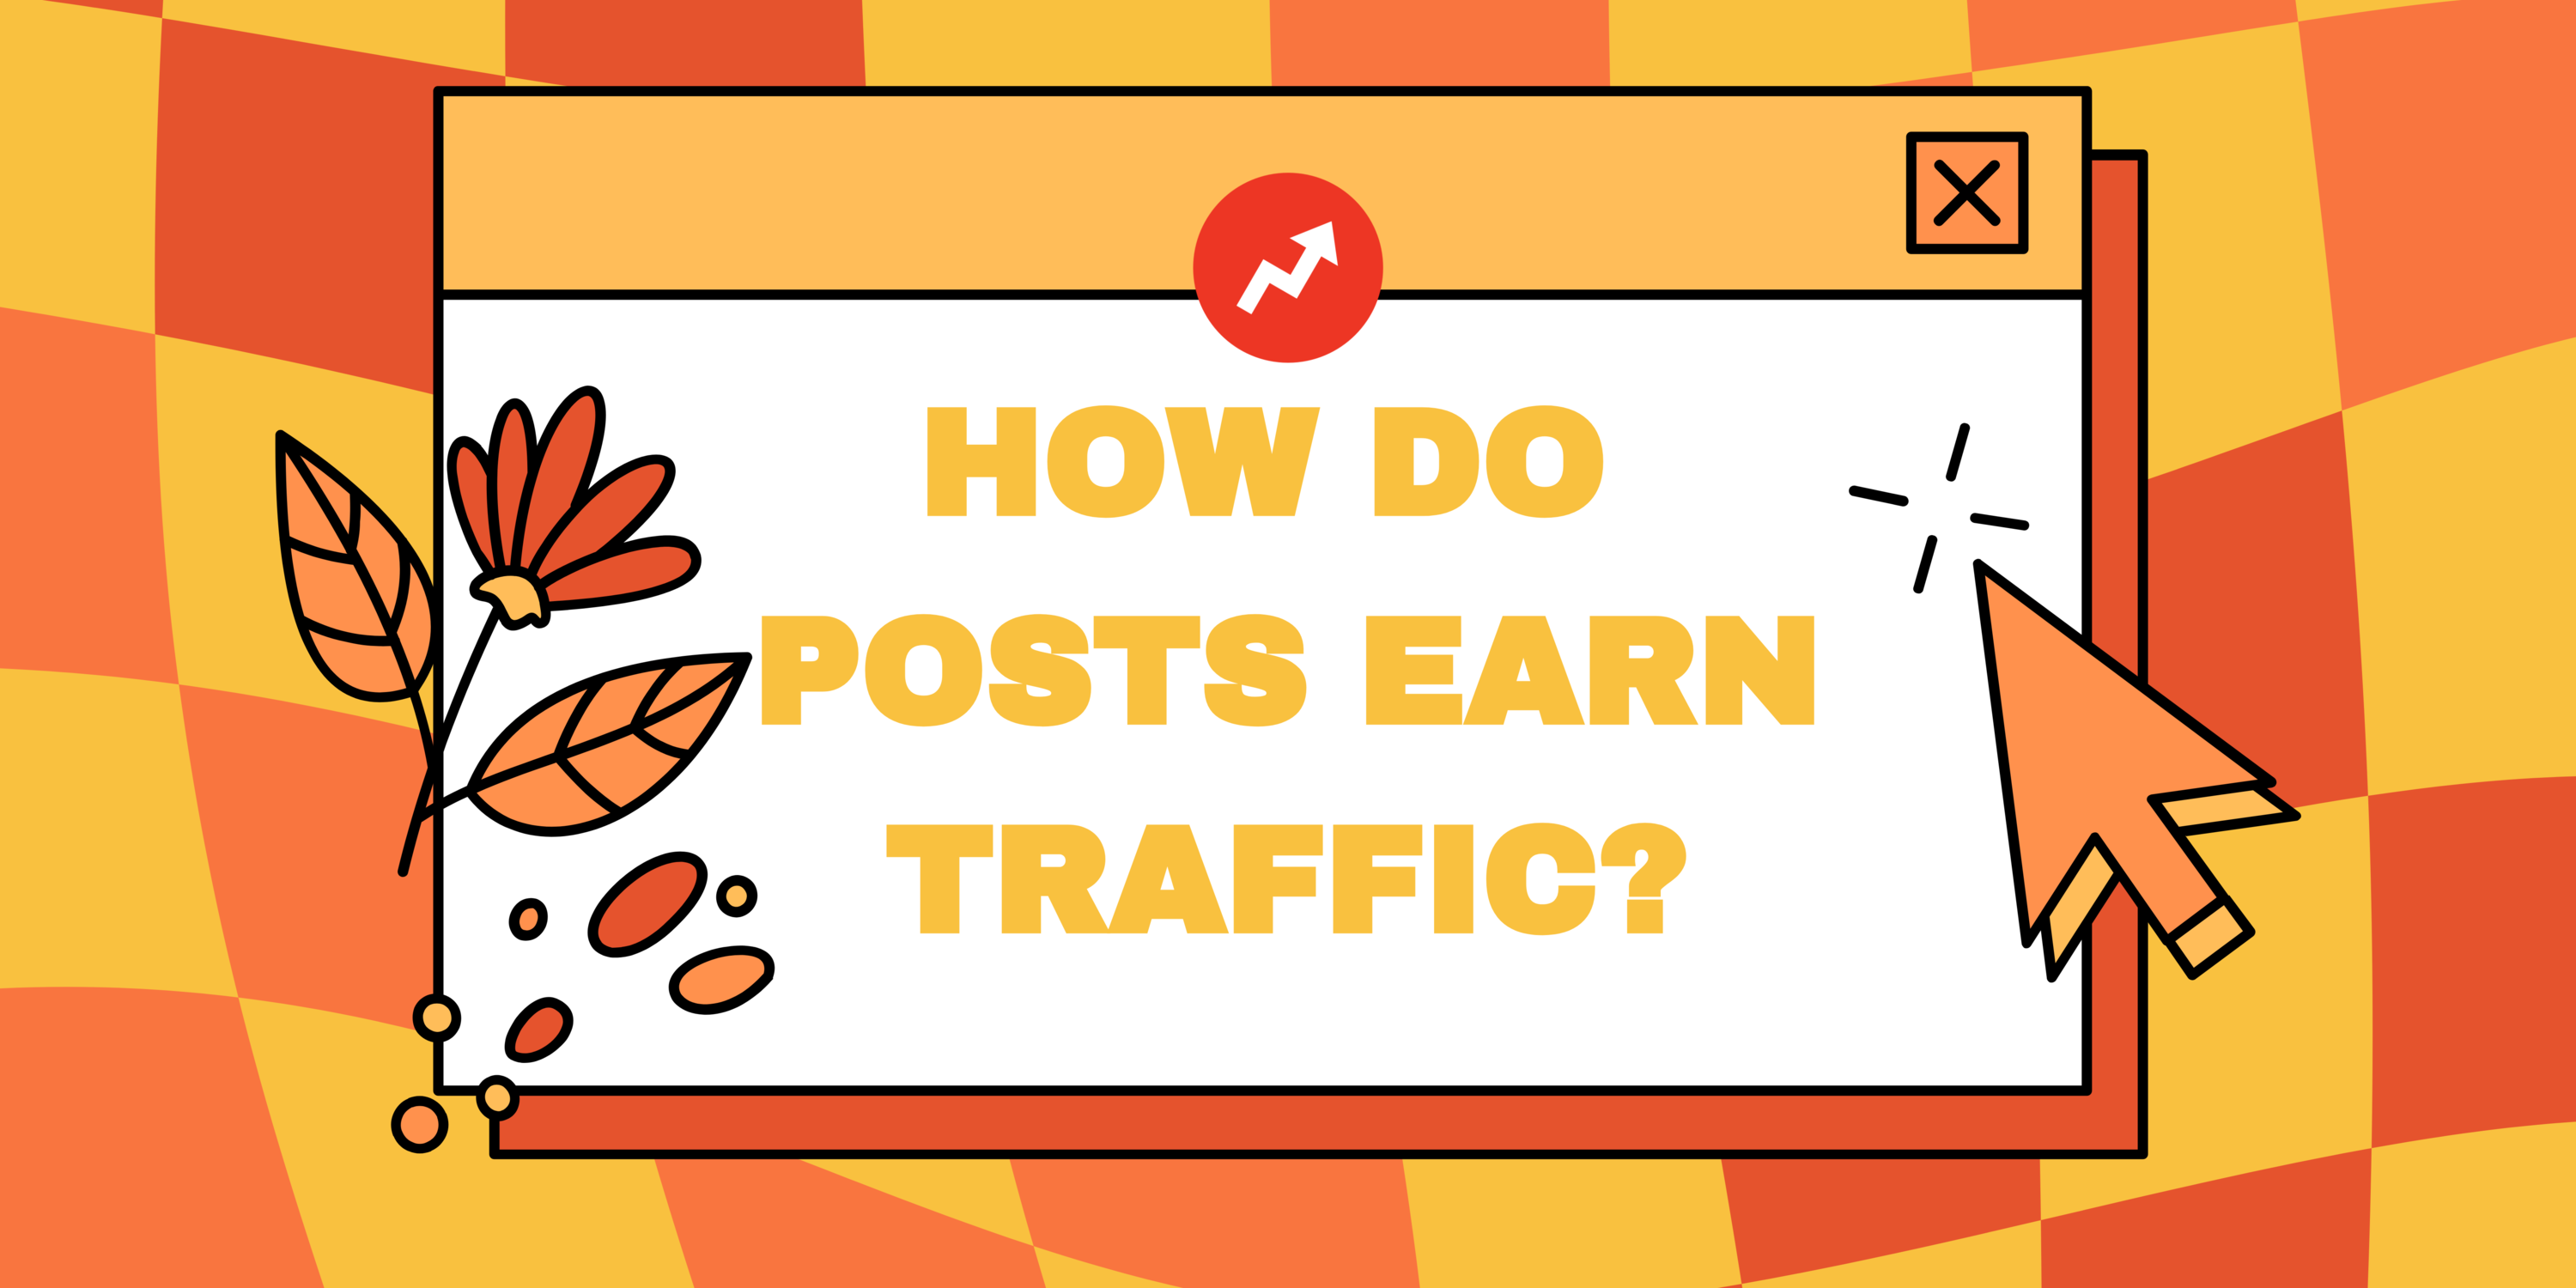 how do posts earn traffic?